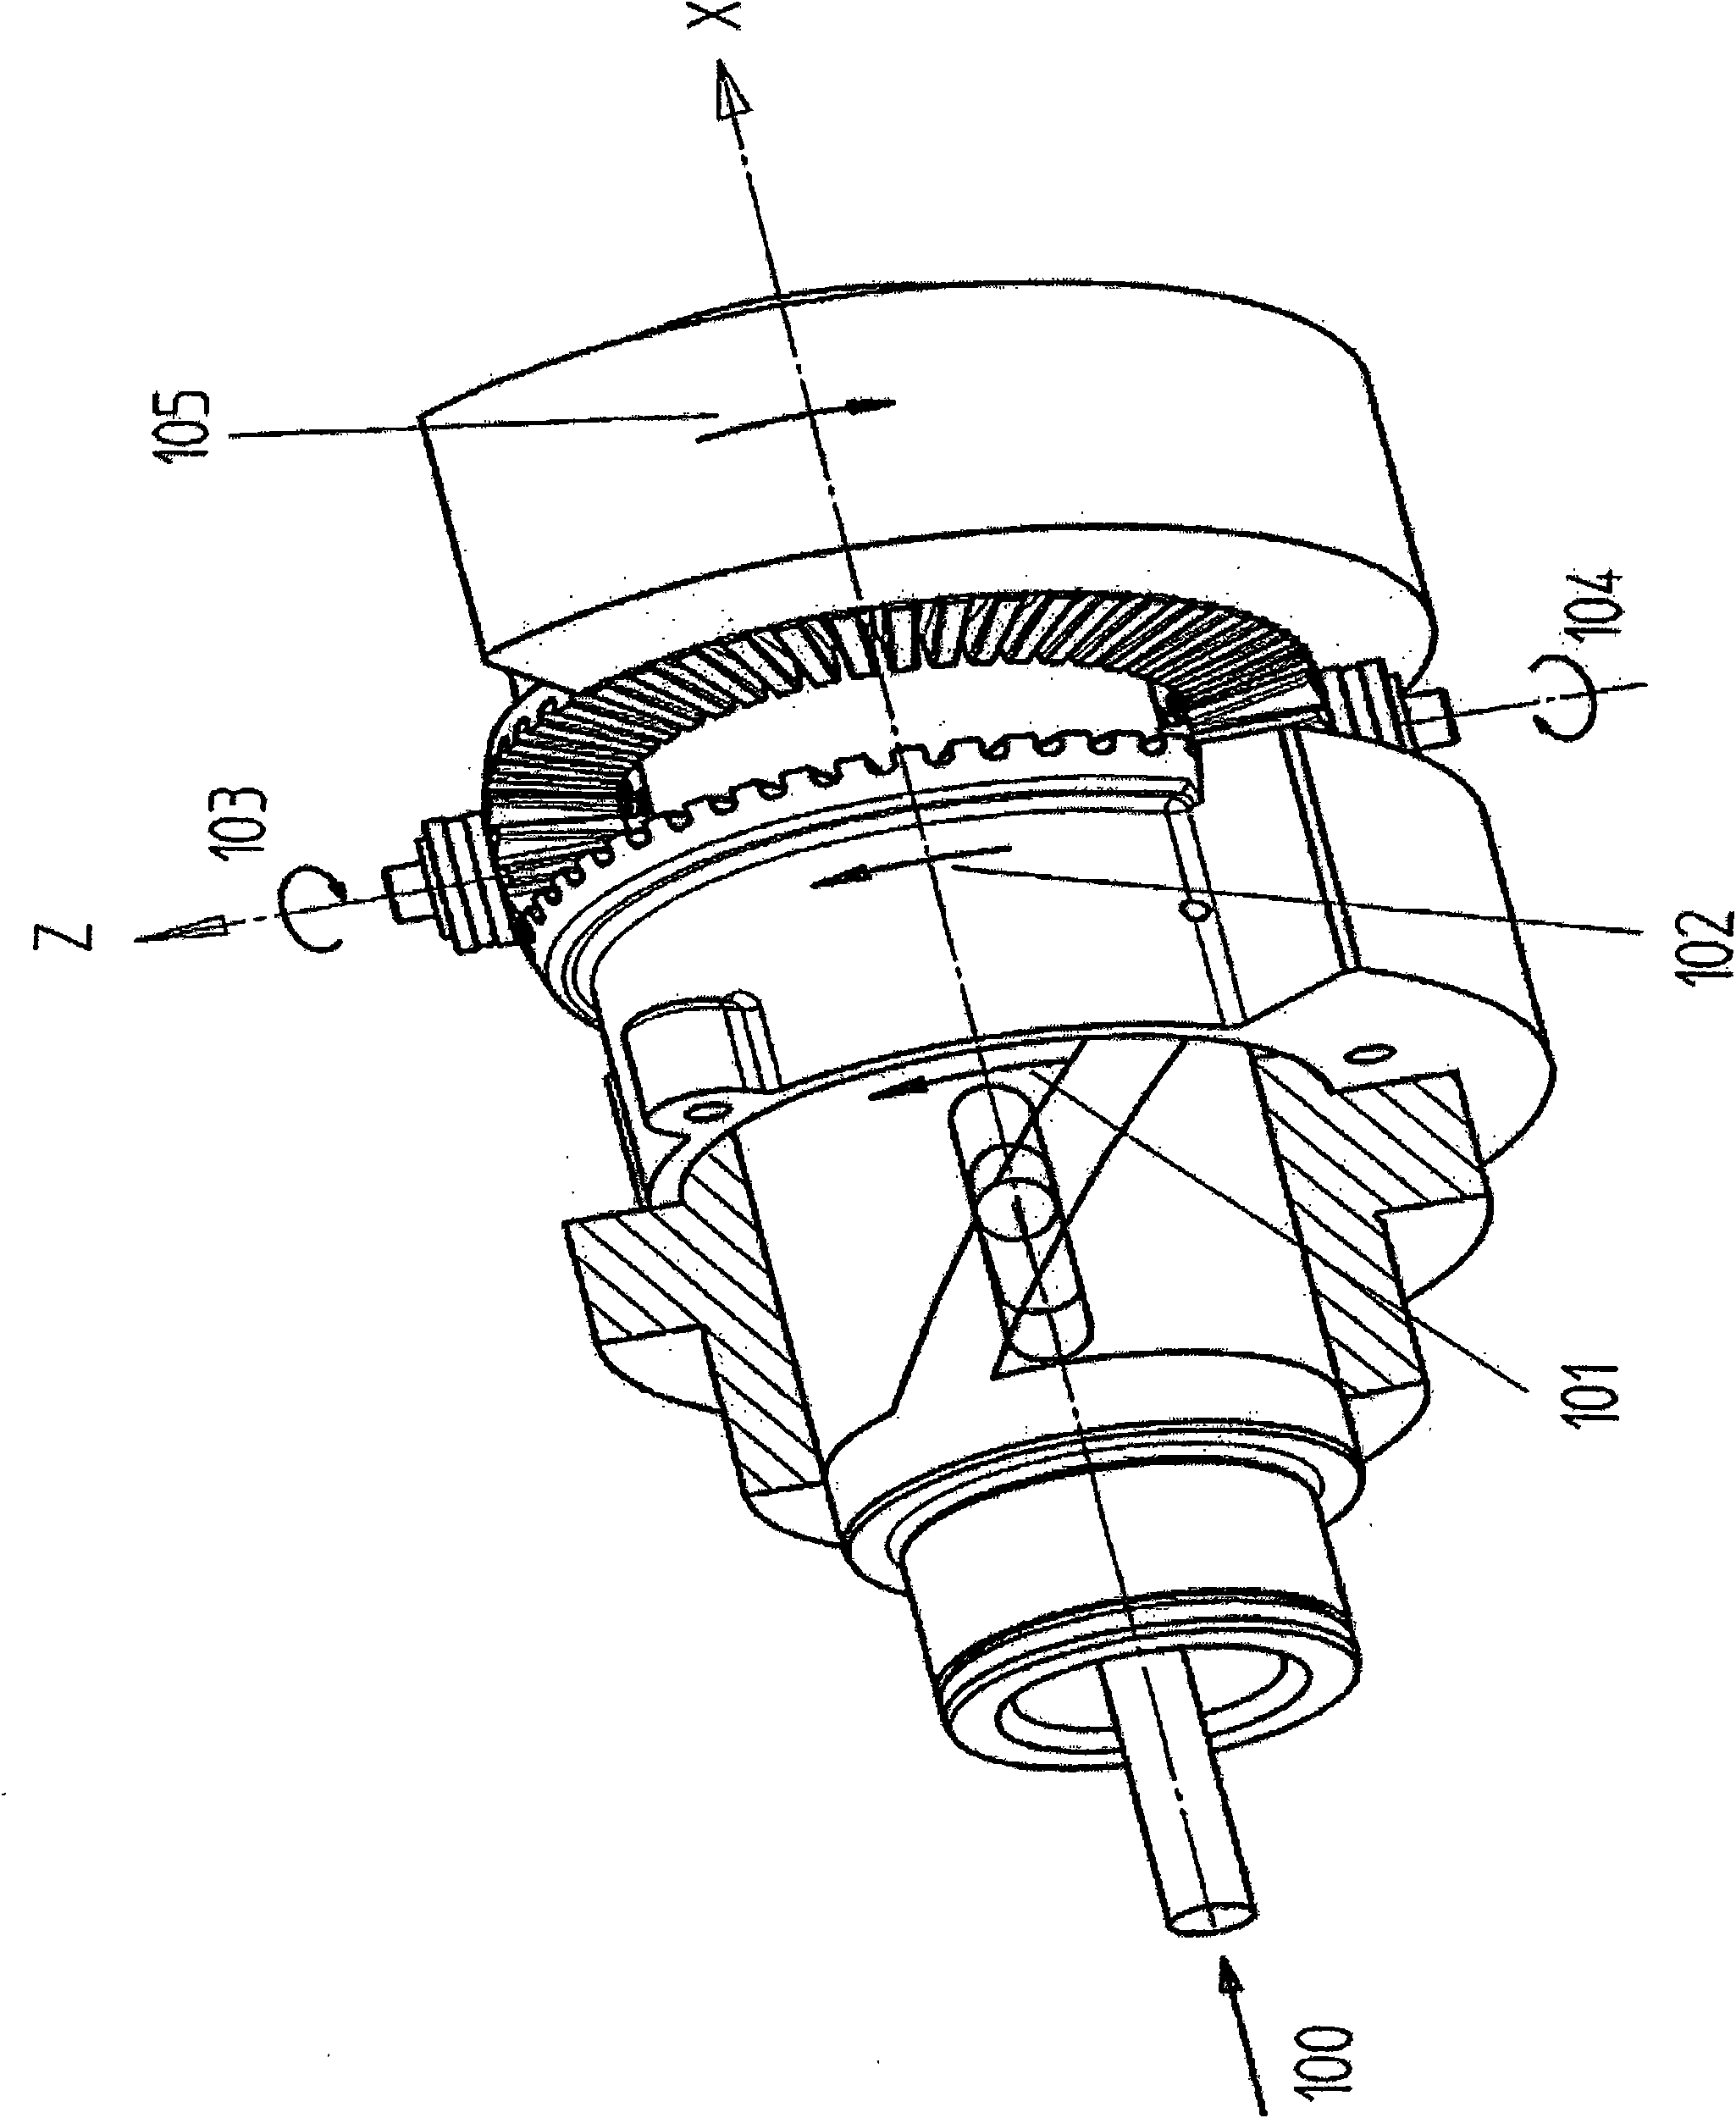 Device for generating circular oscillation or directional oscillation